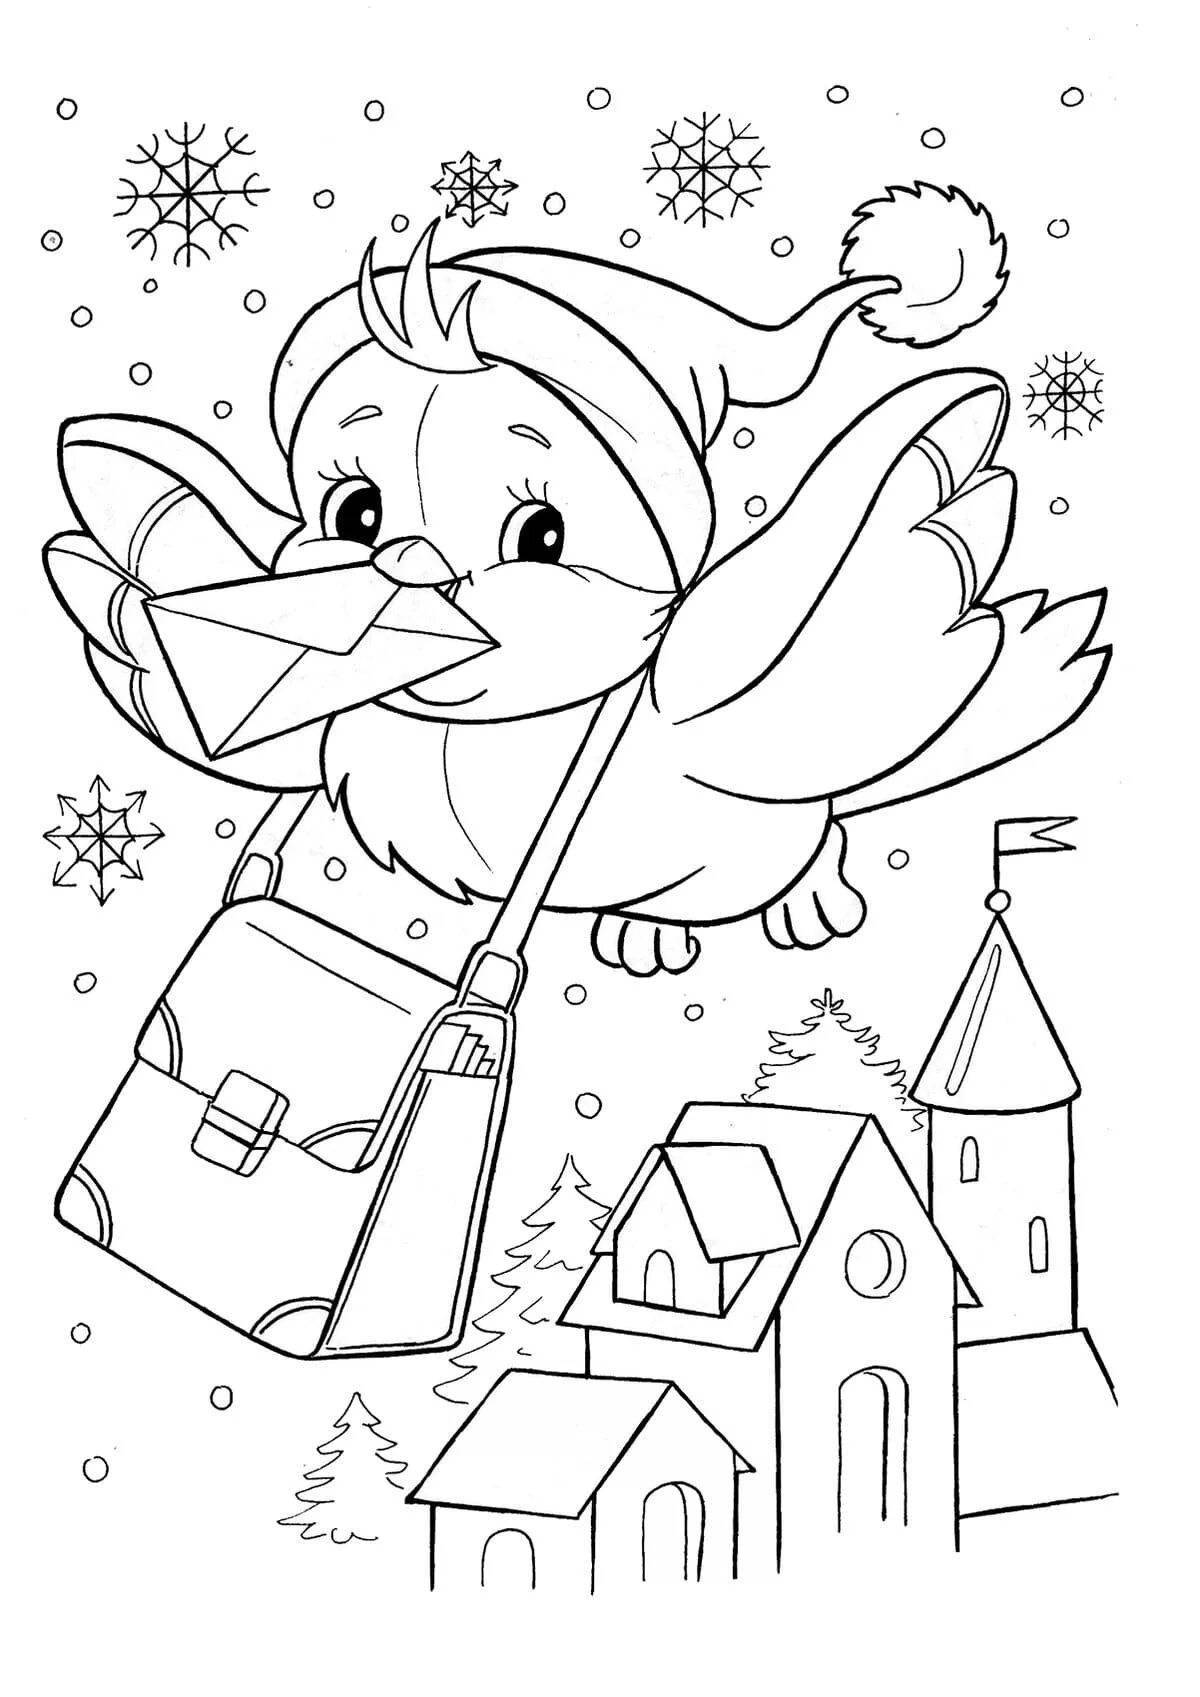 Colorful coloring page 4 5 years of winter